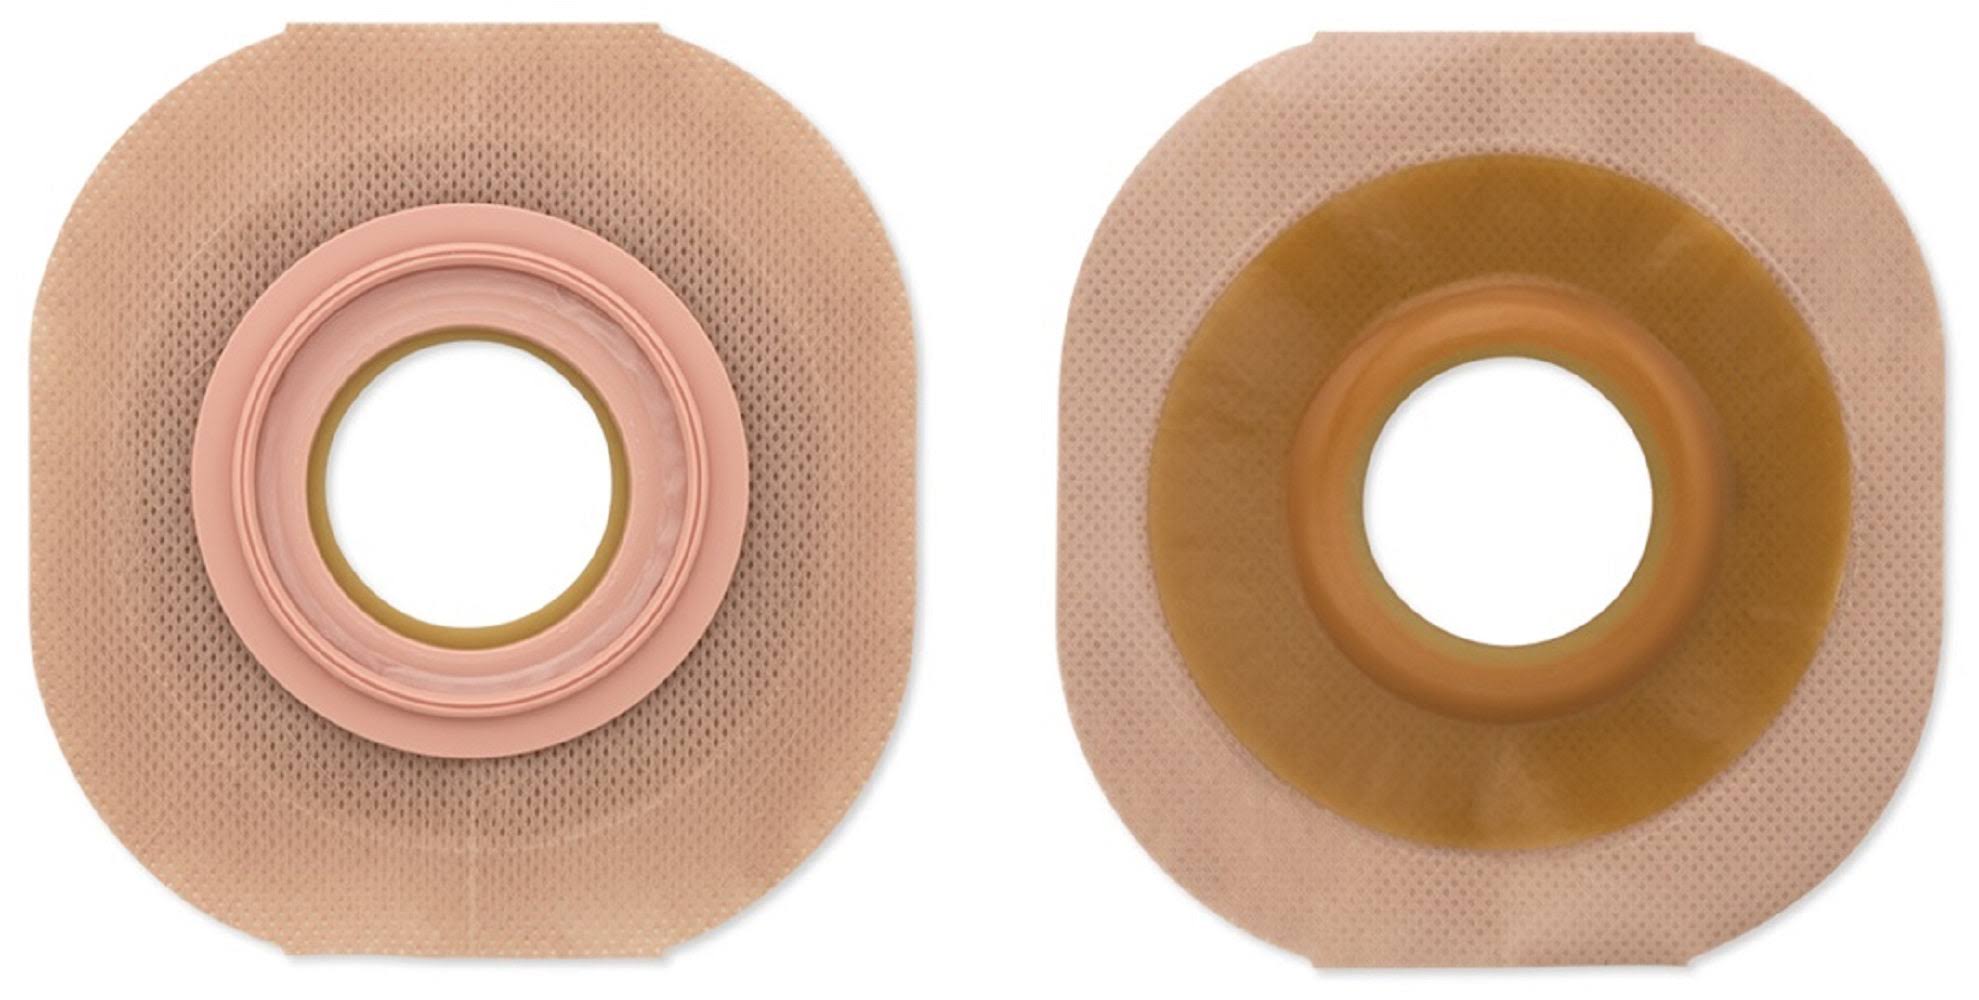 Ostomy Barrier Up To 1 1/2 Inch Stoma Opening Box of 5